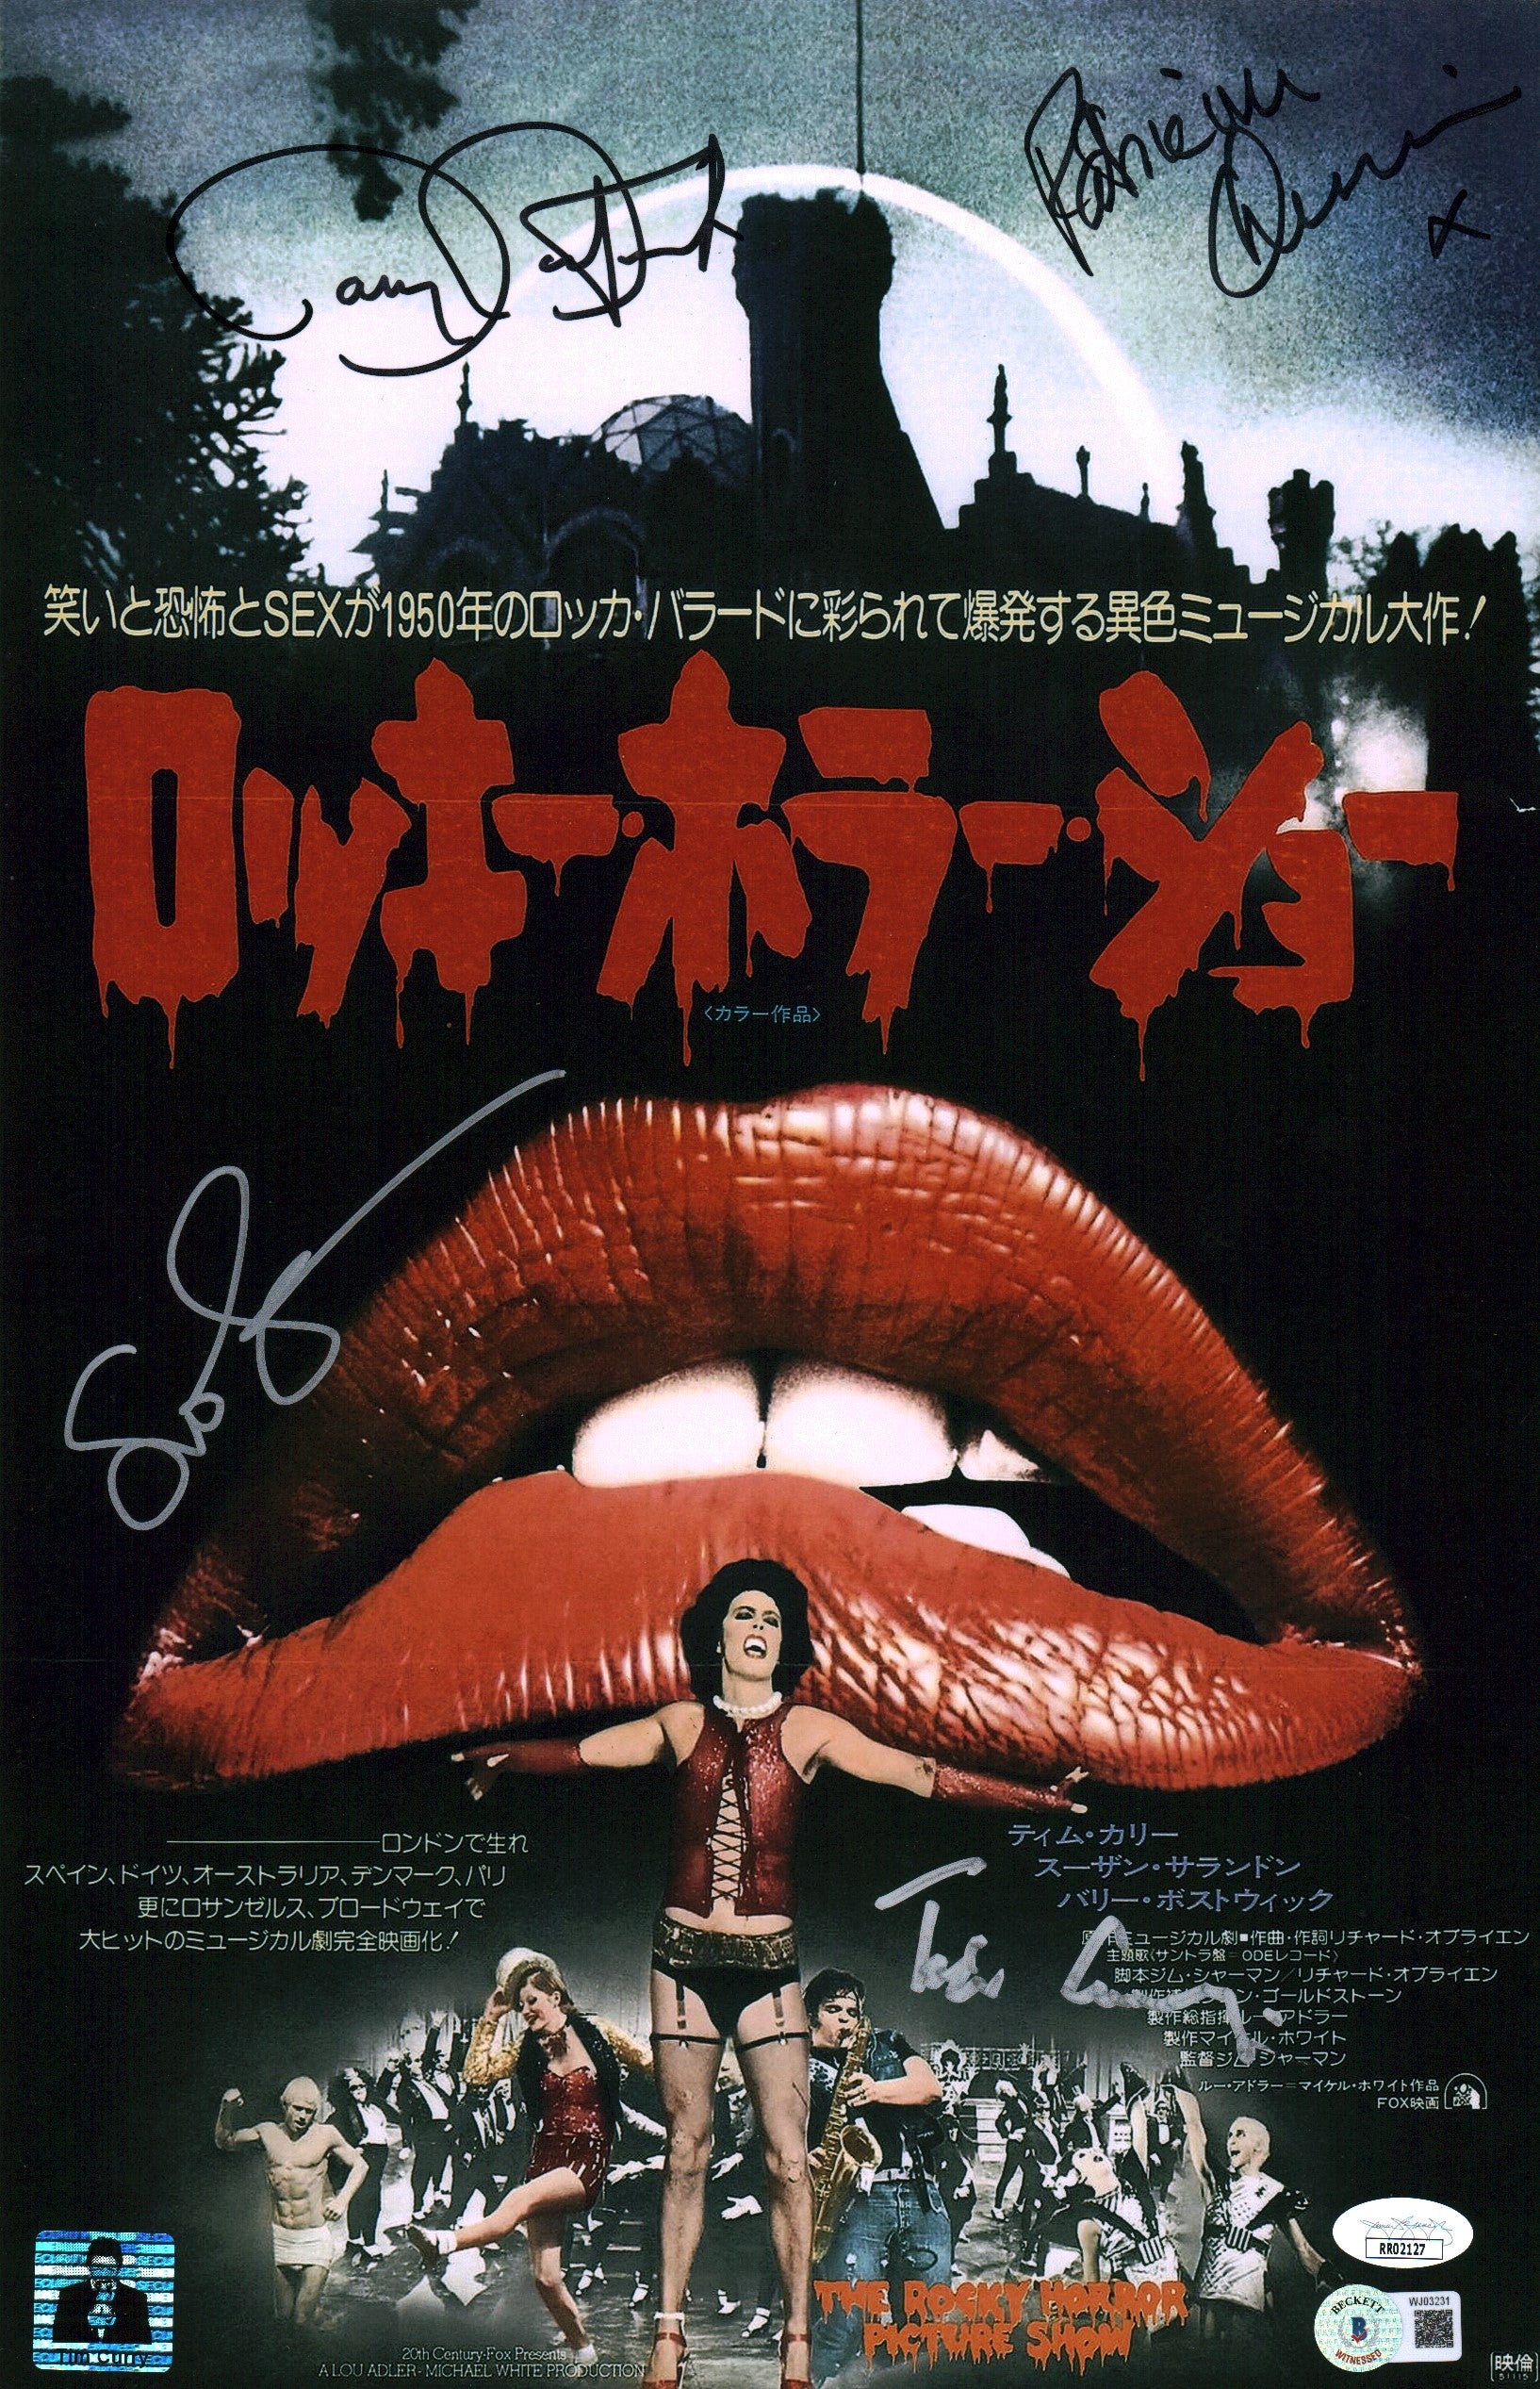 Rocky Horror Picture Show 11x17 Photo Poster Cast x4 Signed Bostwick Curry Quinn Sarandon JSA Certified Autograph